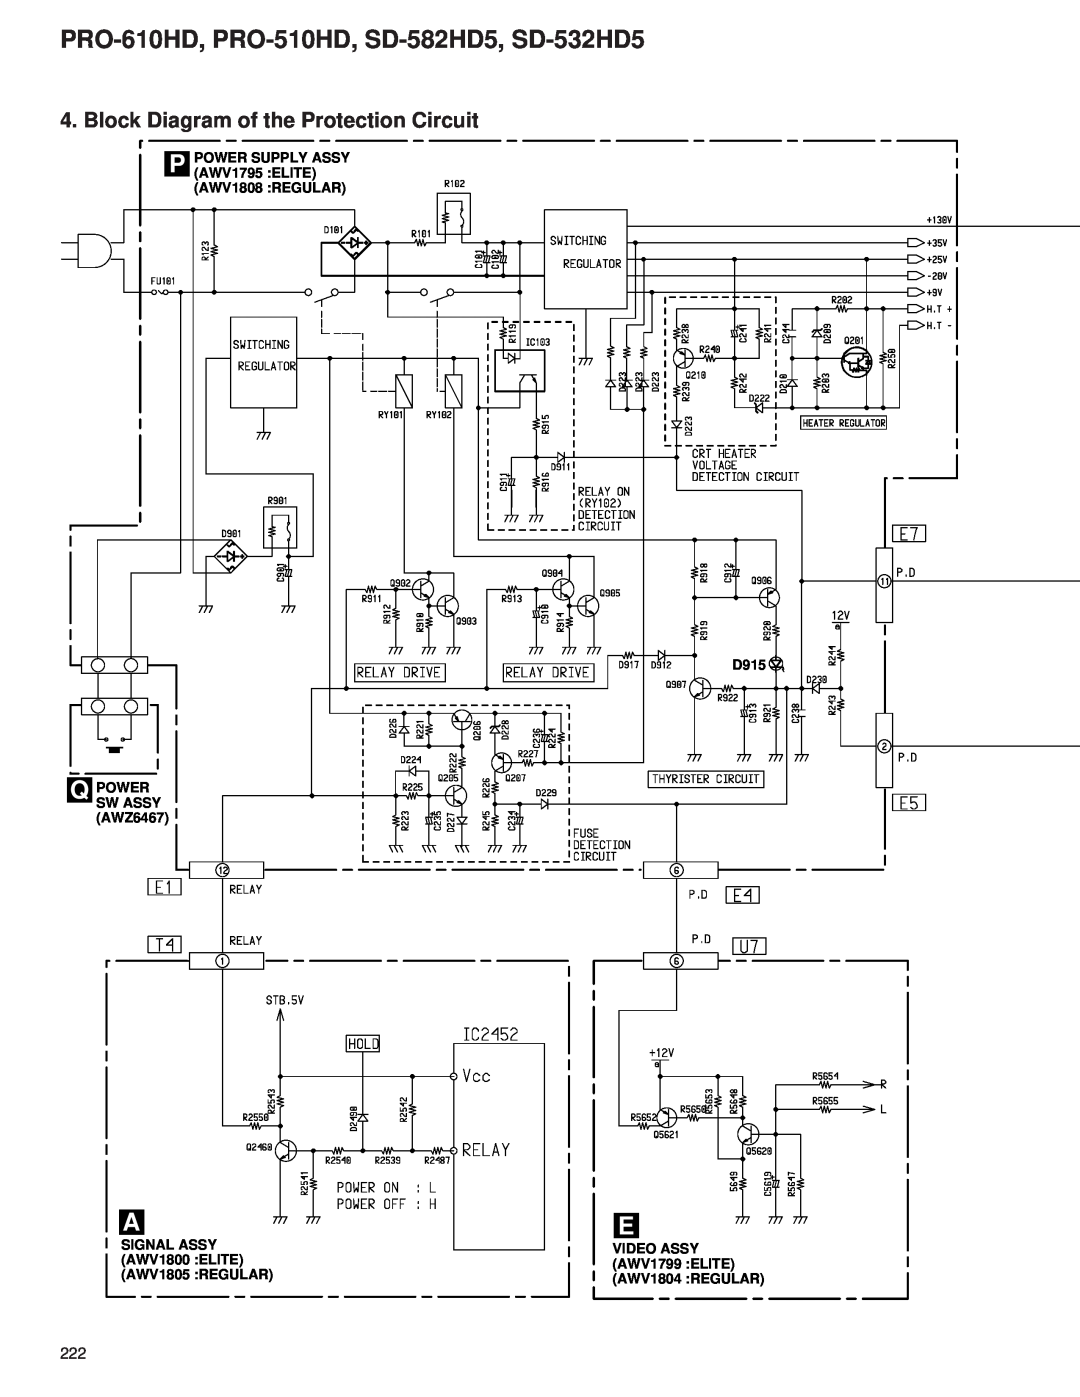 Pioneer service manual Block Diagram of the Protection Circuit, PRO-610HD, PRO-510HD, SD-582HD5, SD-532HD5 